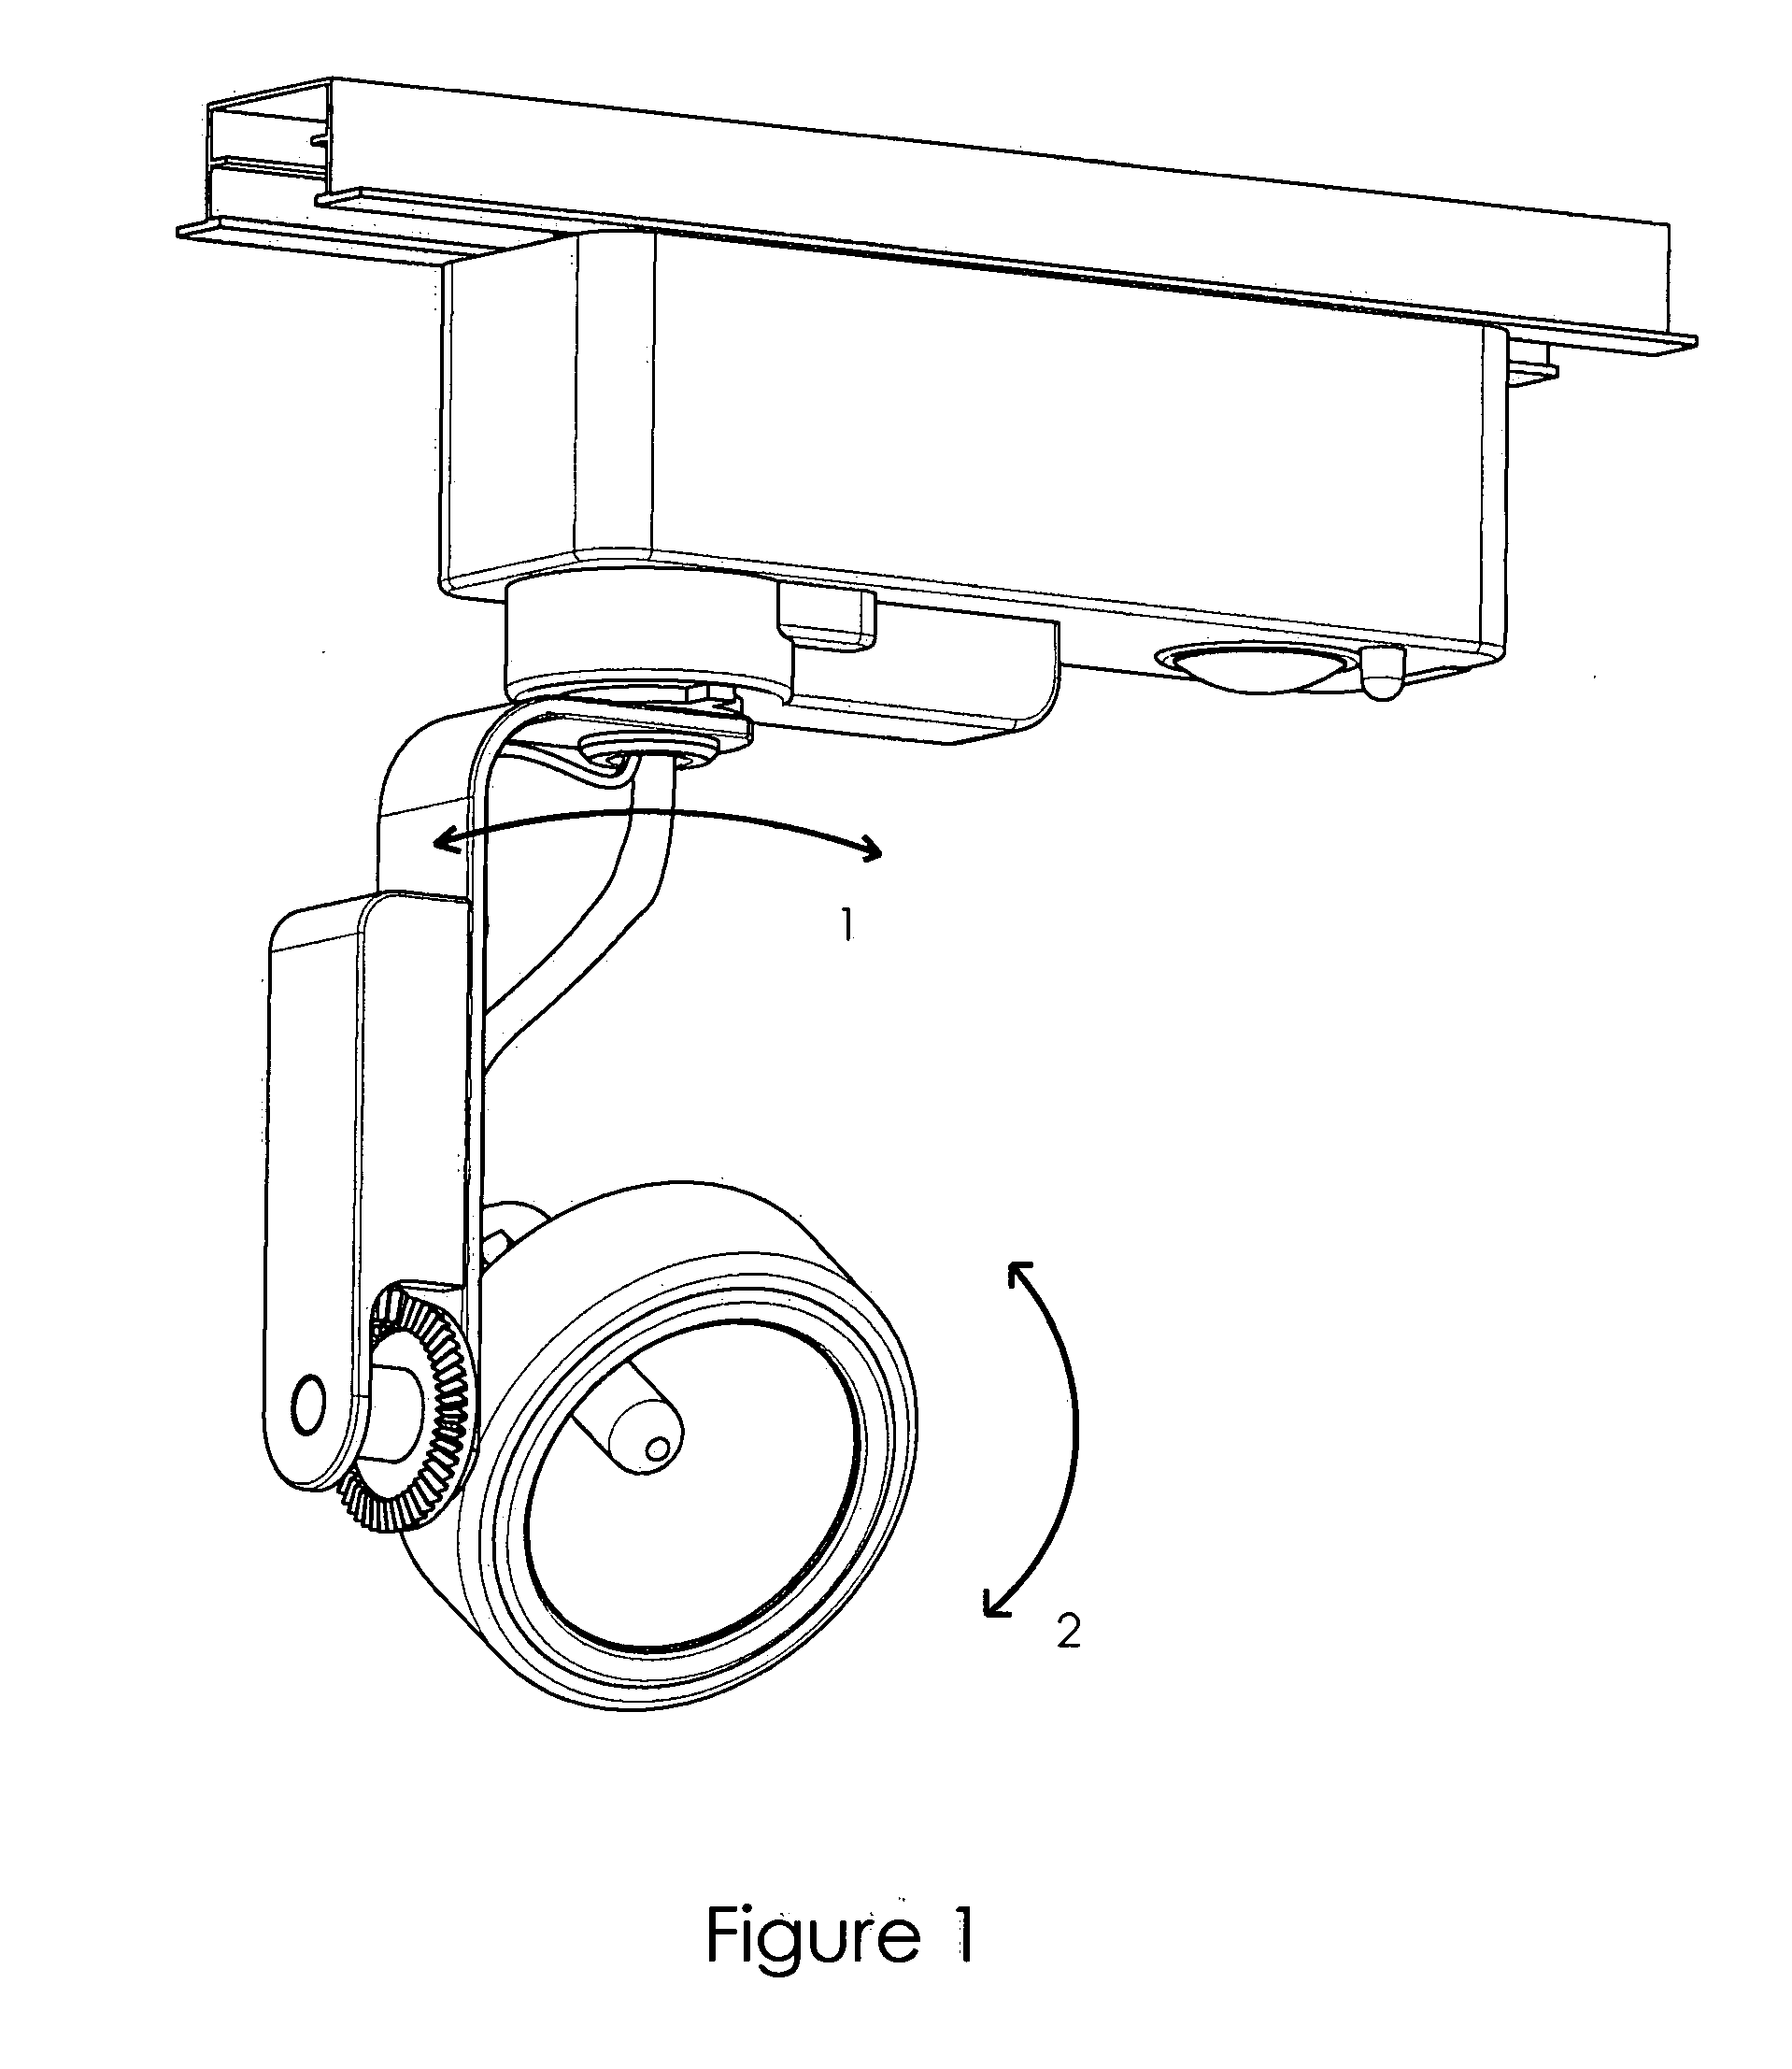 Motorized lamp axis assembly